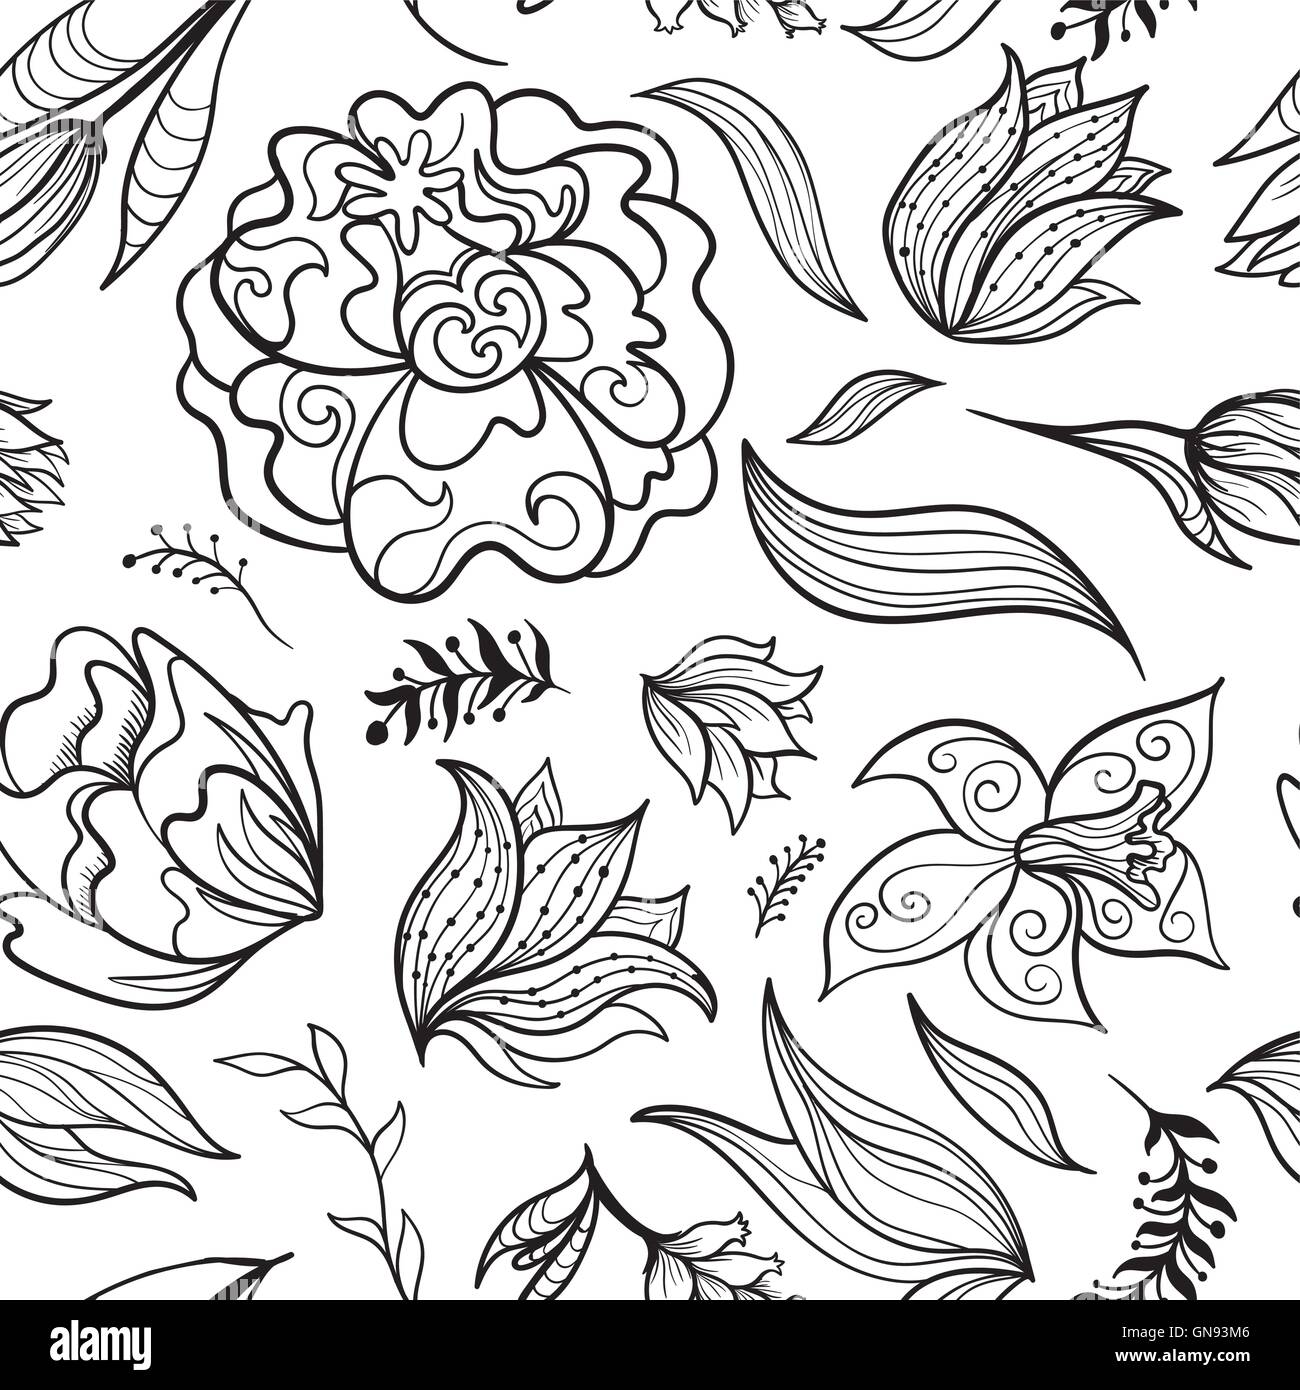 Black and White Floral Vector Pattern Stock Vector